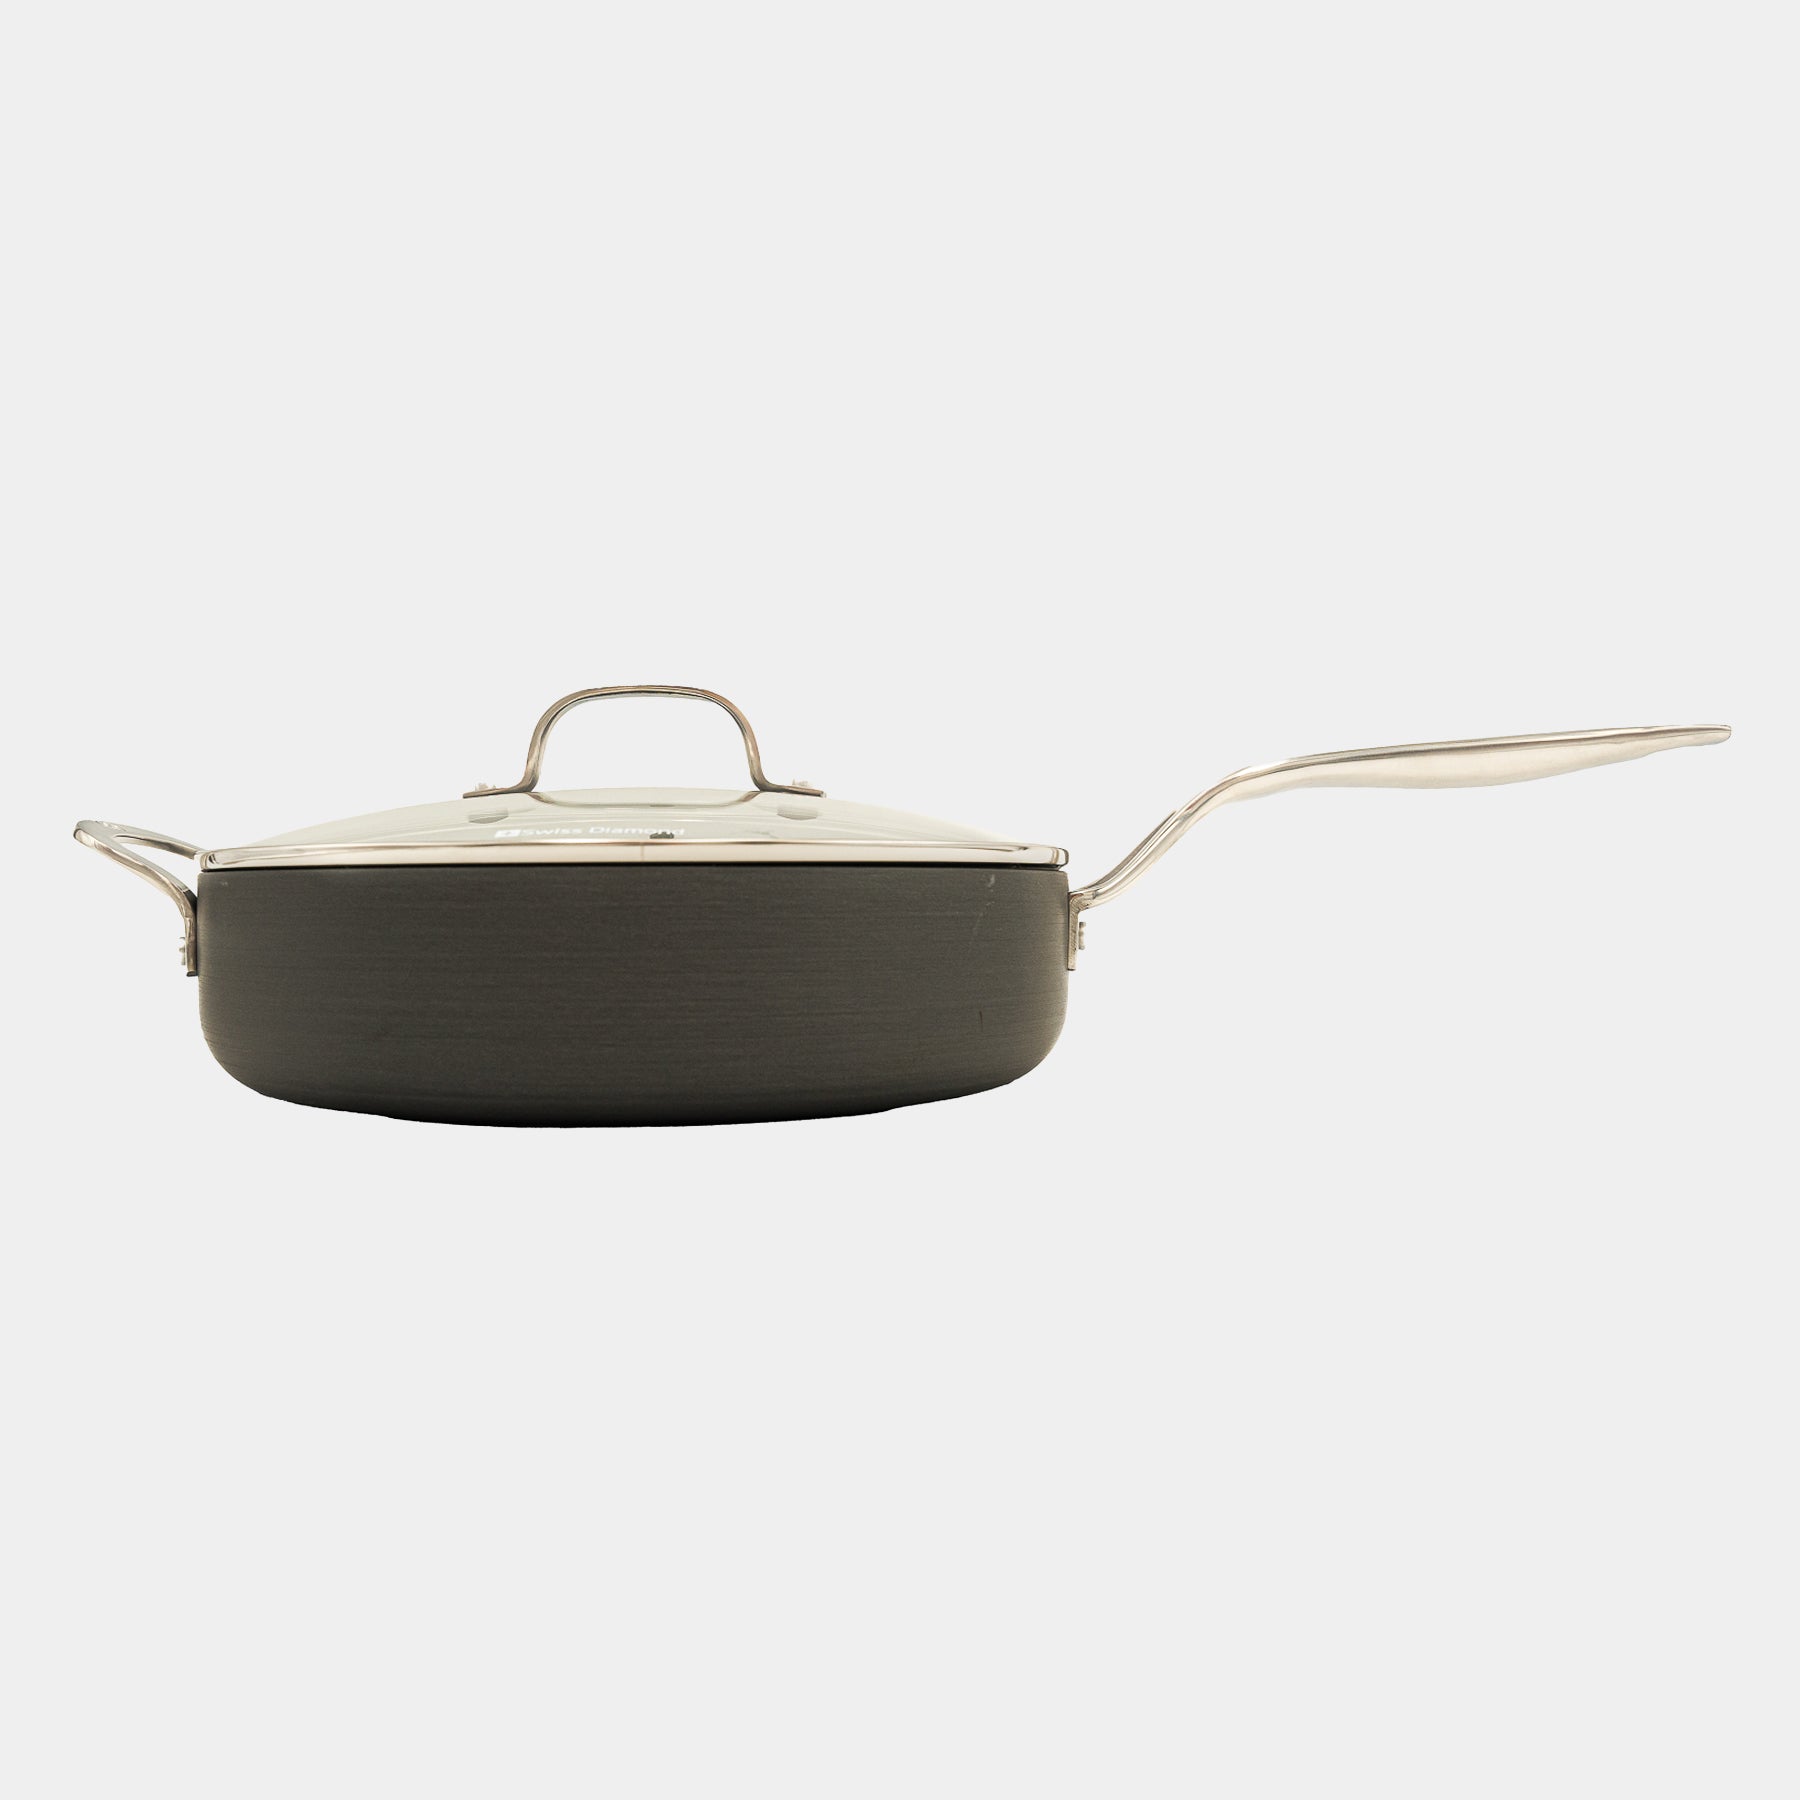 Hard Anodised 4 qt Saute Pan with Glass Lid